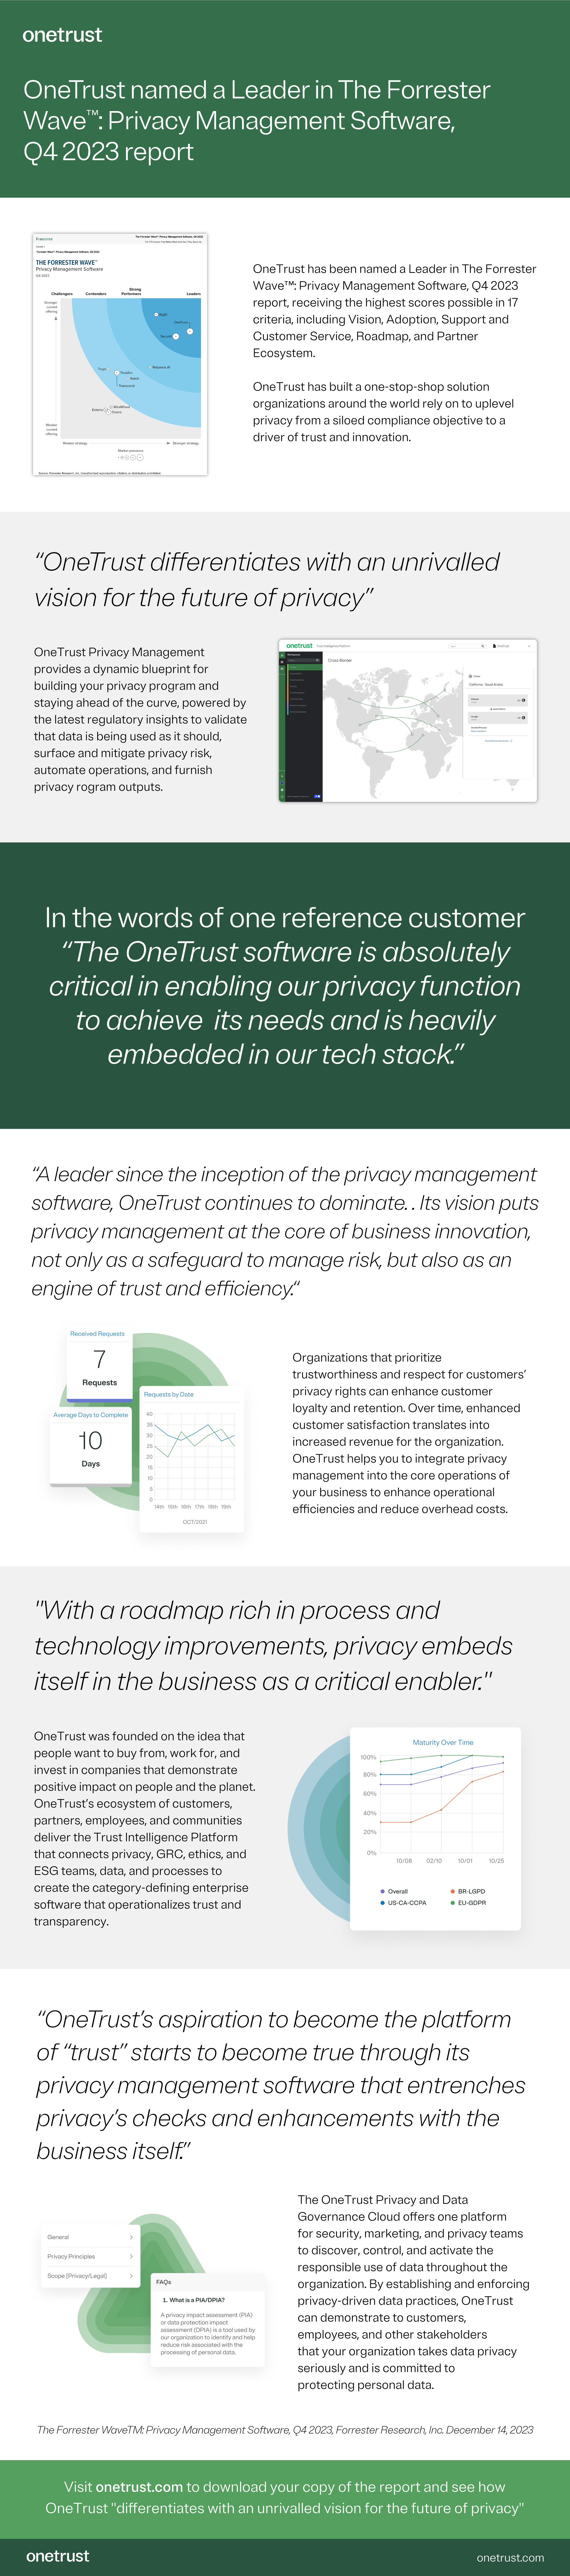 Infographic about OneTrust's accomplishments in the Q4 2023 Forrester Wave: Privacy Management Software report.